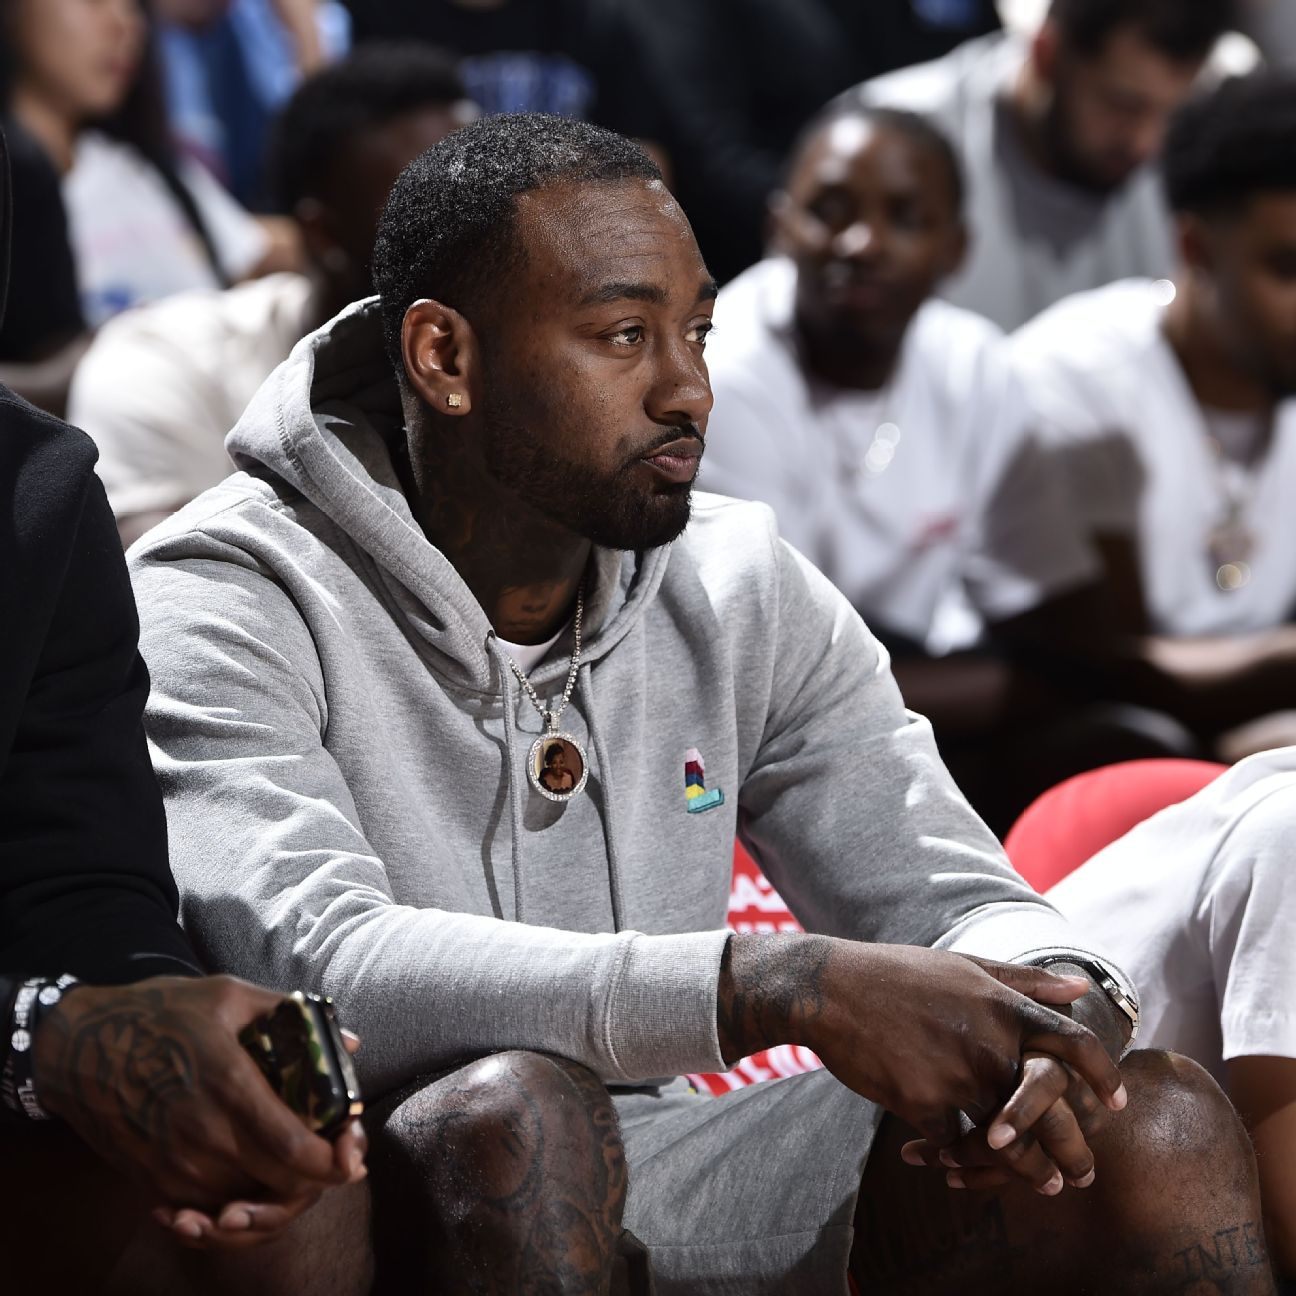 John Wall Made Mistake by Not Signing With Lakers, per Insider